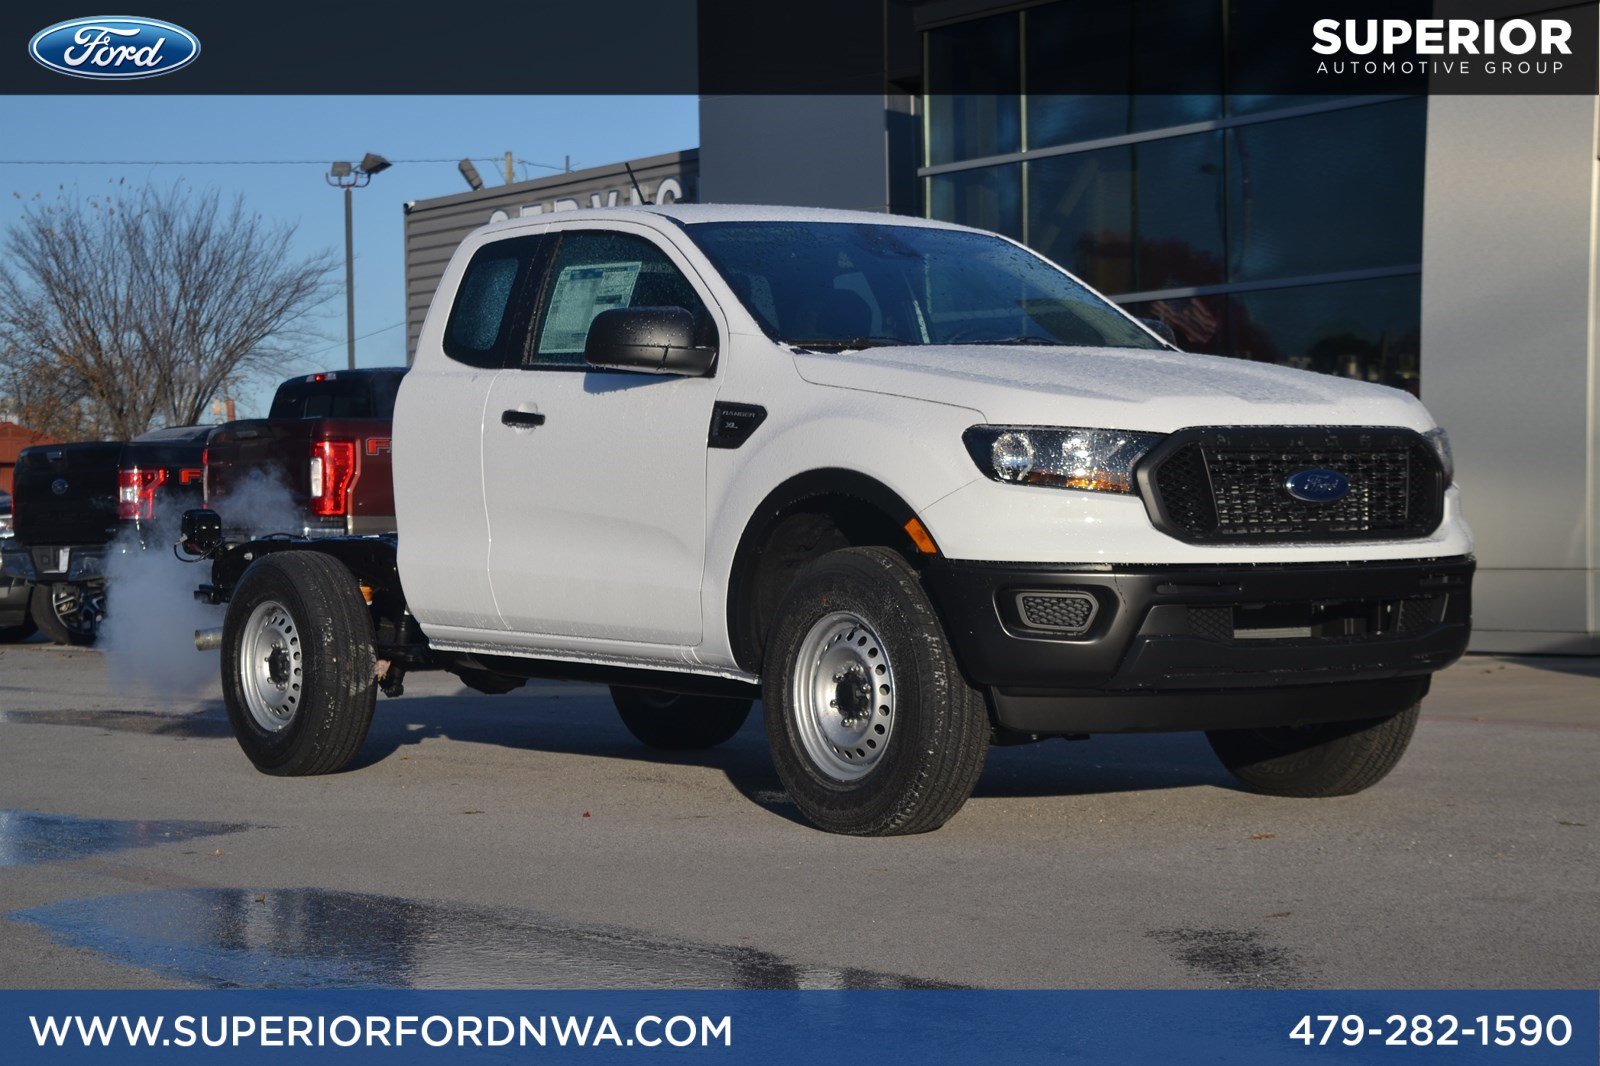 New 2019 Ford Ranger Xl Extended Cab Rwd Extended Cab Pickup